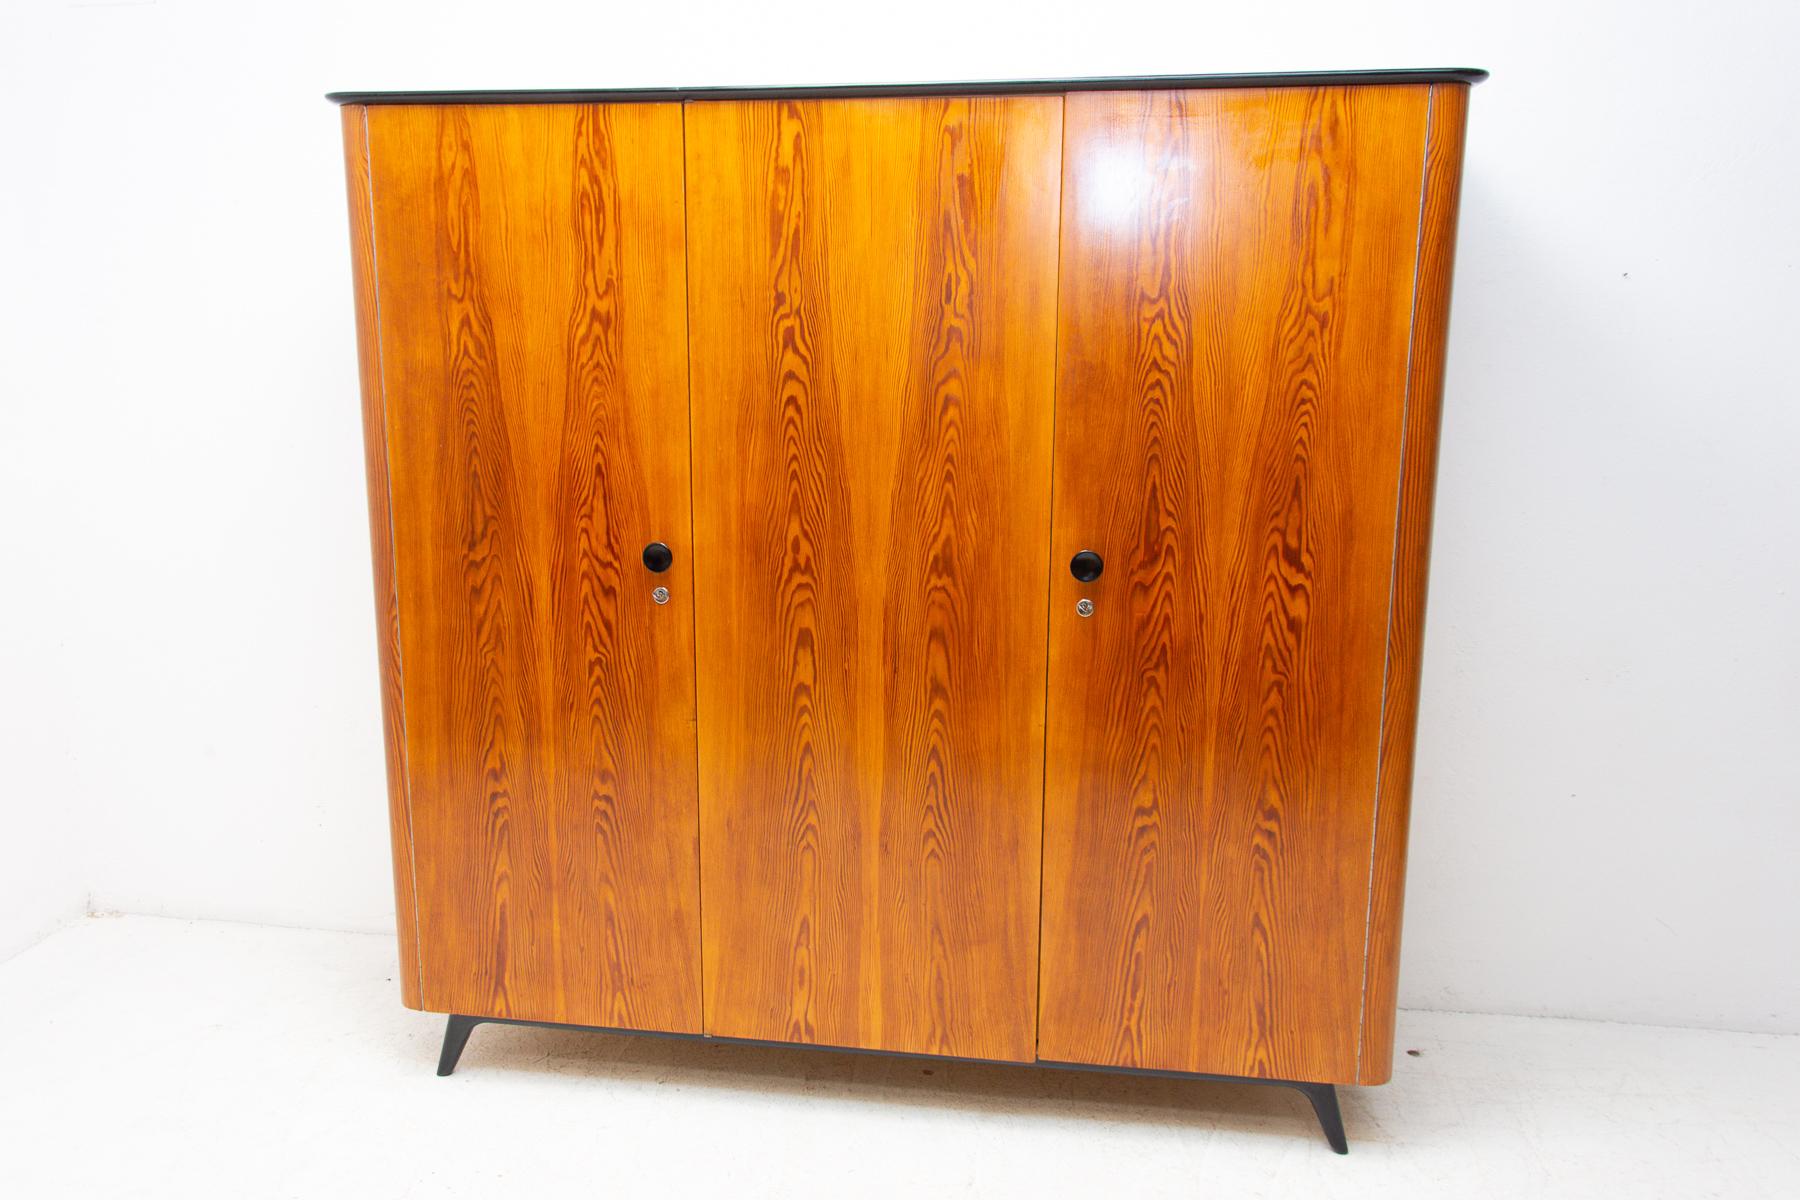 This wardrobe was made in the former Czechoslovakia in the 1950´s.
It was part of a complete bedroom suite by Jindrich Halabala. In excellent condition, fully renovated. It´s made of pine wood. Outstanding, simple design typical of Jindrich Halabala